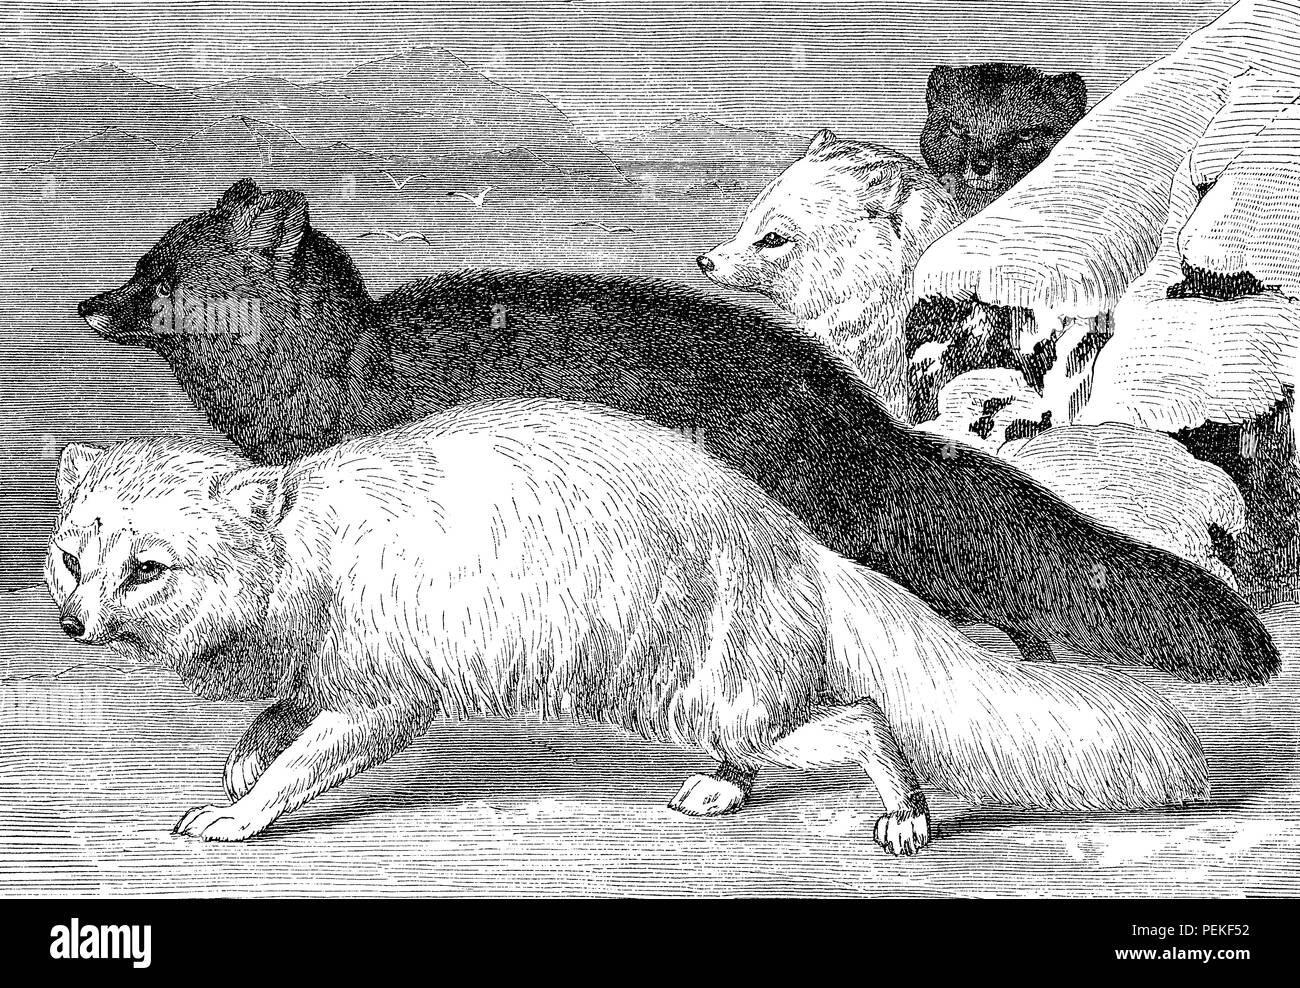 Vintage engraving of white fox and silver fox, one uses its white fur as camouflage in Arctic regions, the other is a melanistic variation with black fur and only the hair tips white. Stock Photo